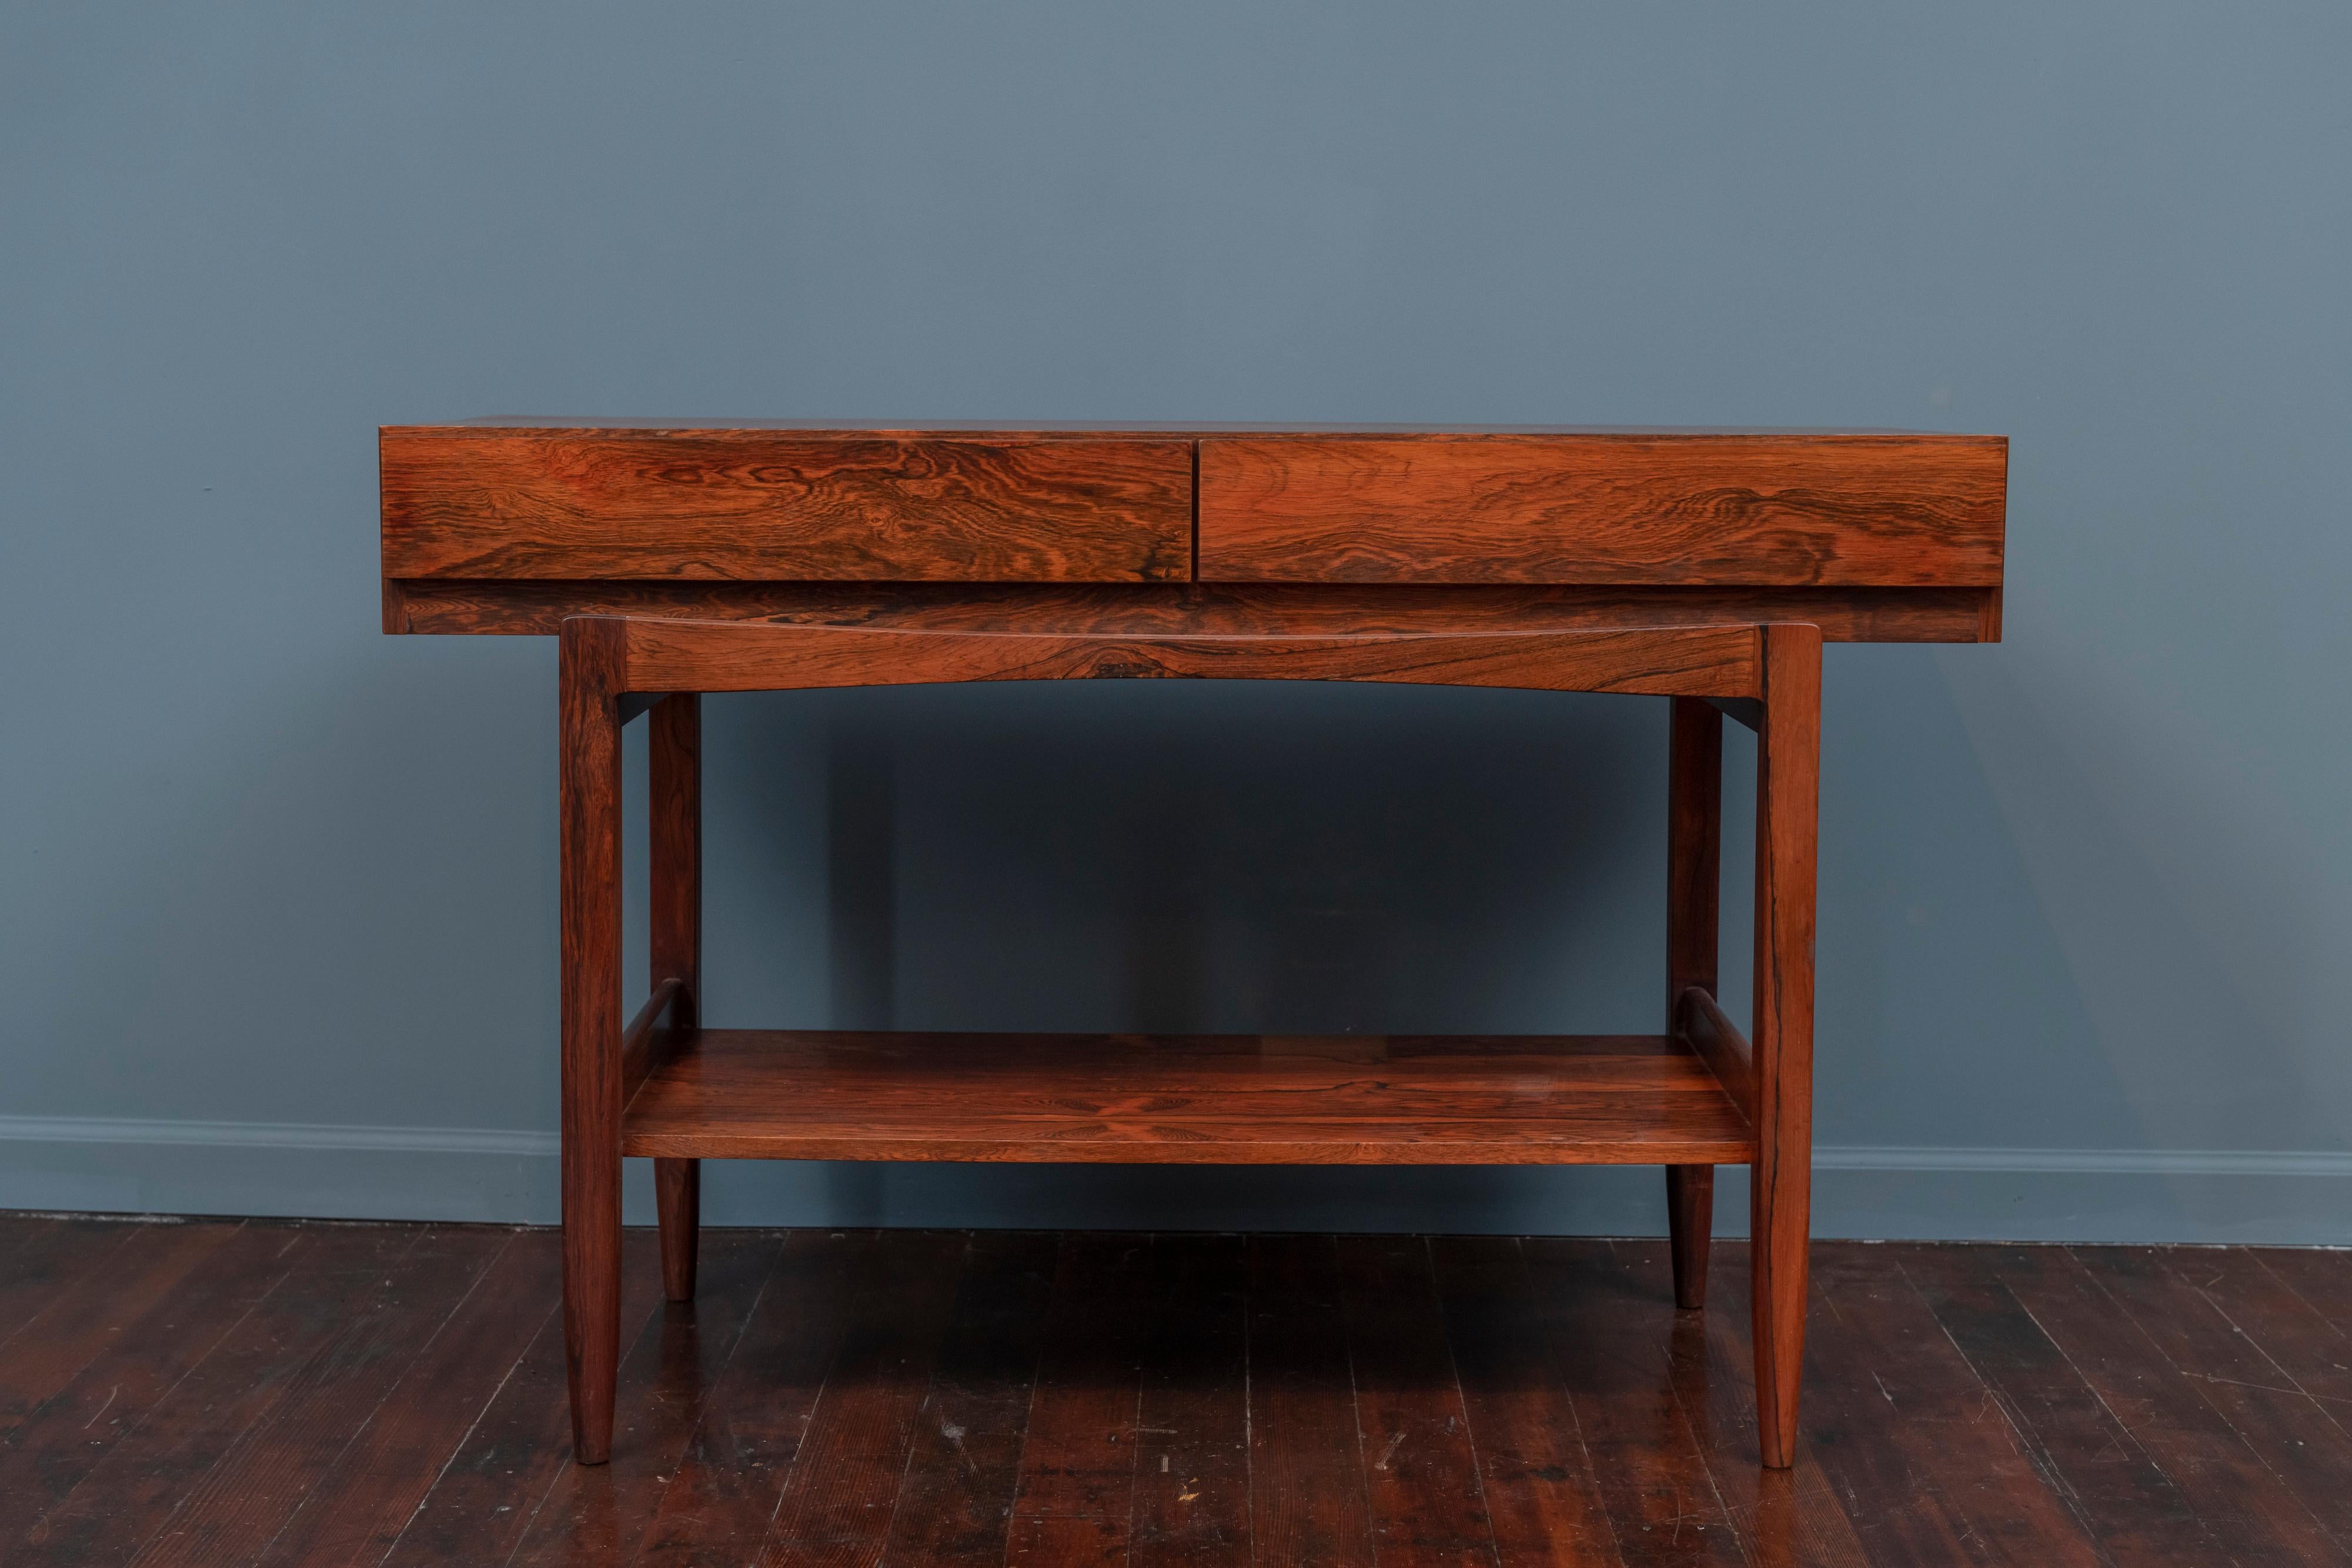 Ib Kofod-Larsen design rosewood console table for Faarup, Denmark. Newly refinished rosewood veneer console table with dramatic cathedrals, two drawers and an elegant Minimalist design.